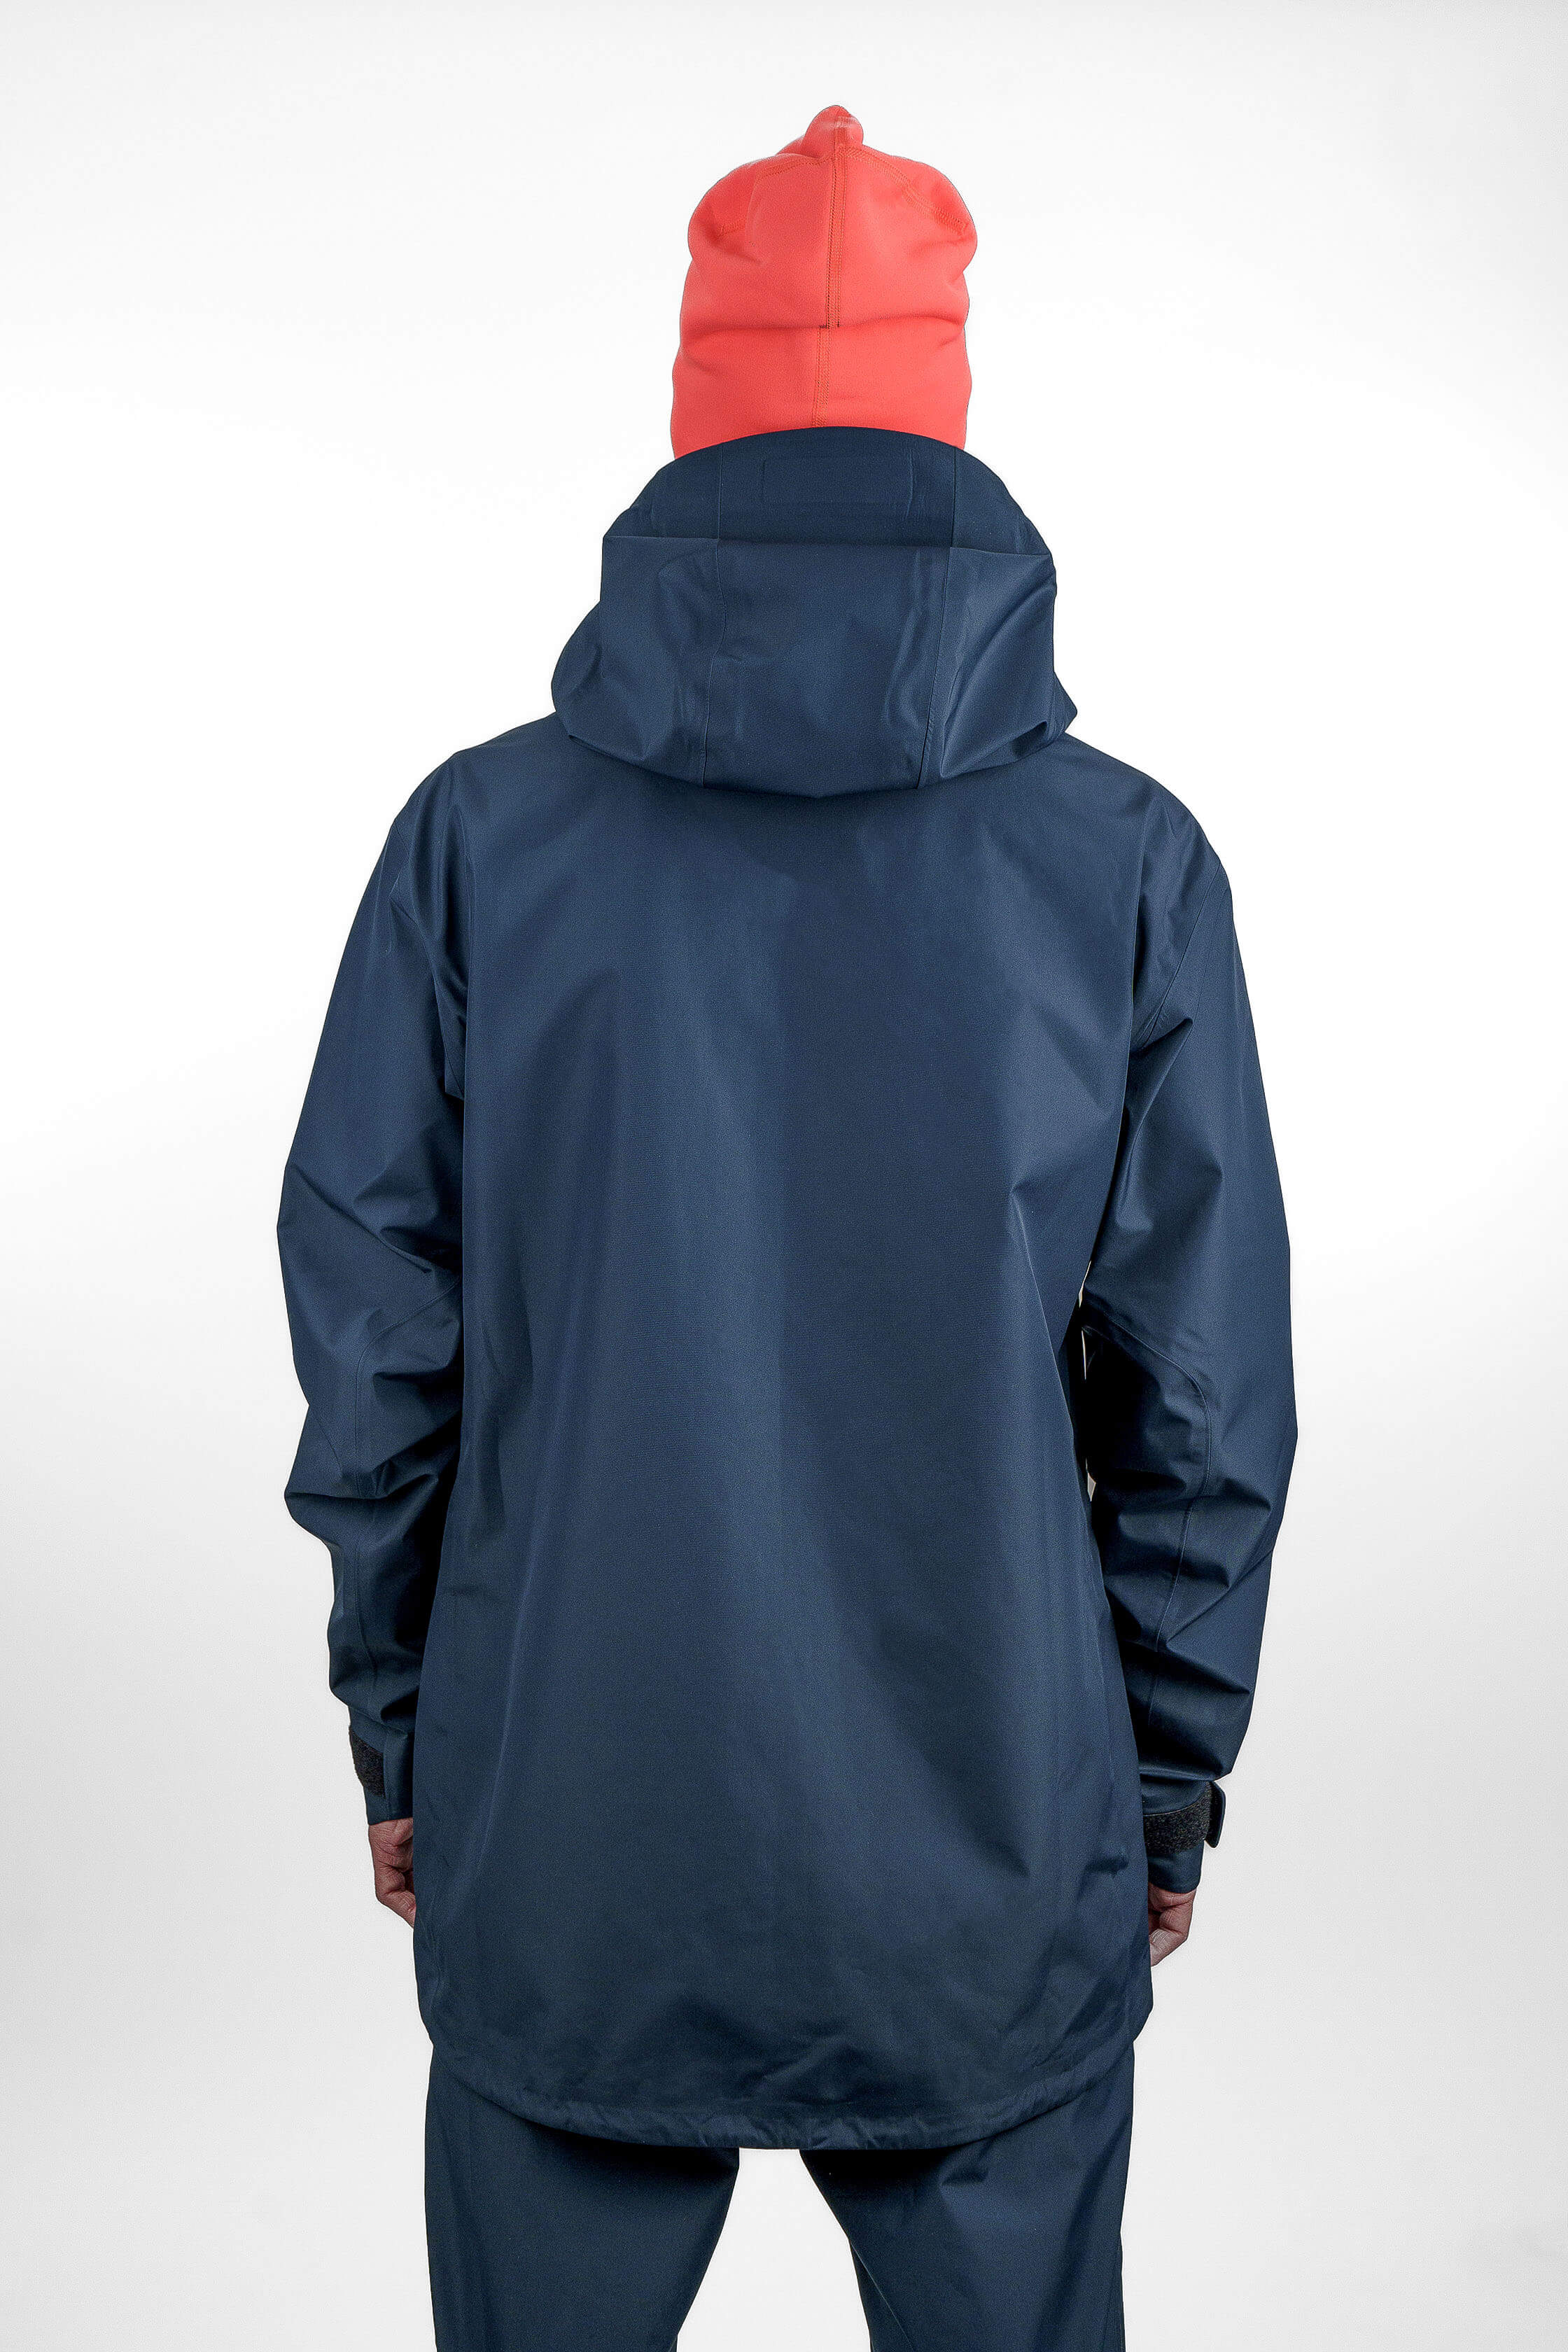 Sustainable Outdoor Clothing for Men - Made in Europe - Arctic Legacy